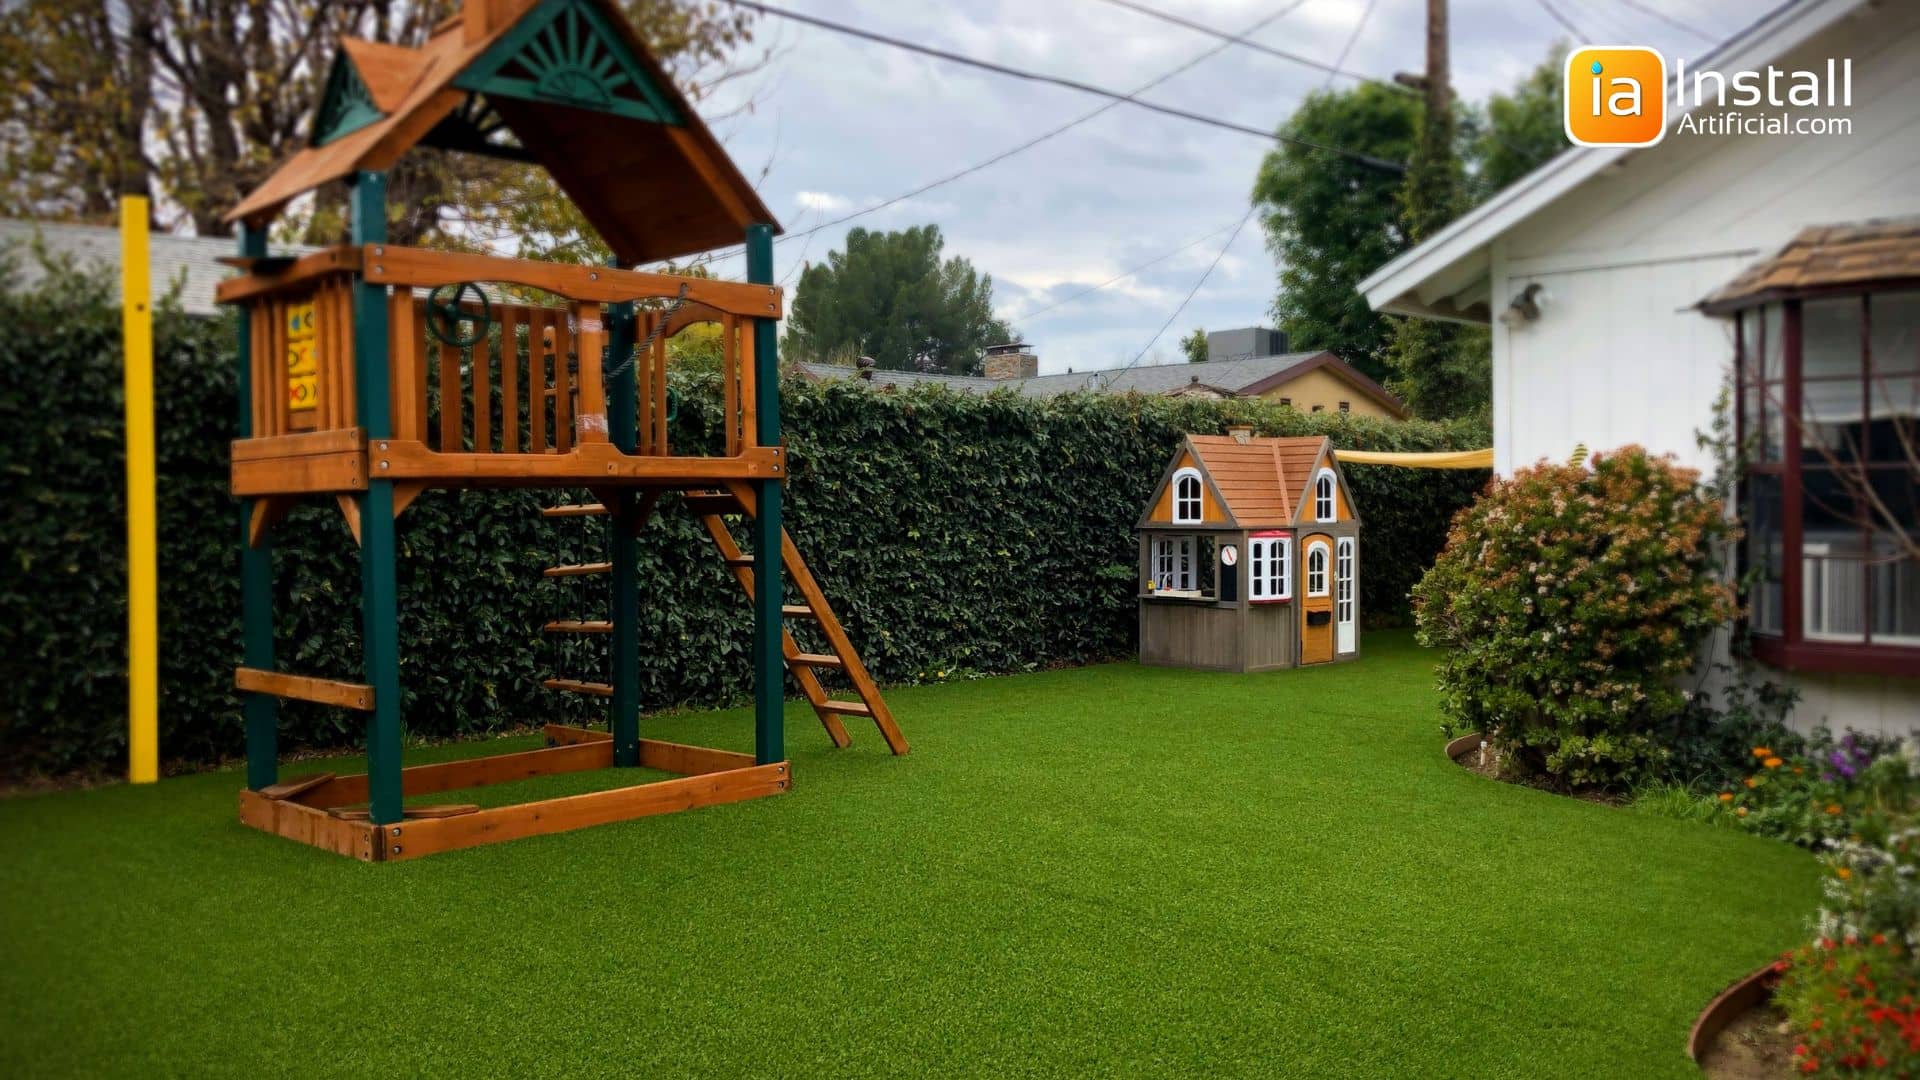 Buy Artificial Grass Online for Play Area